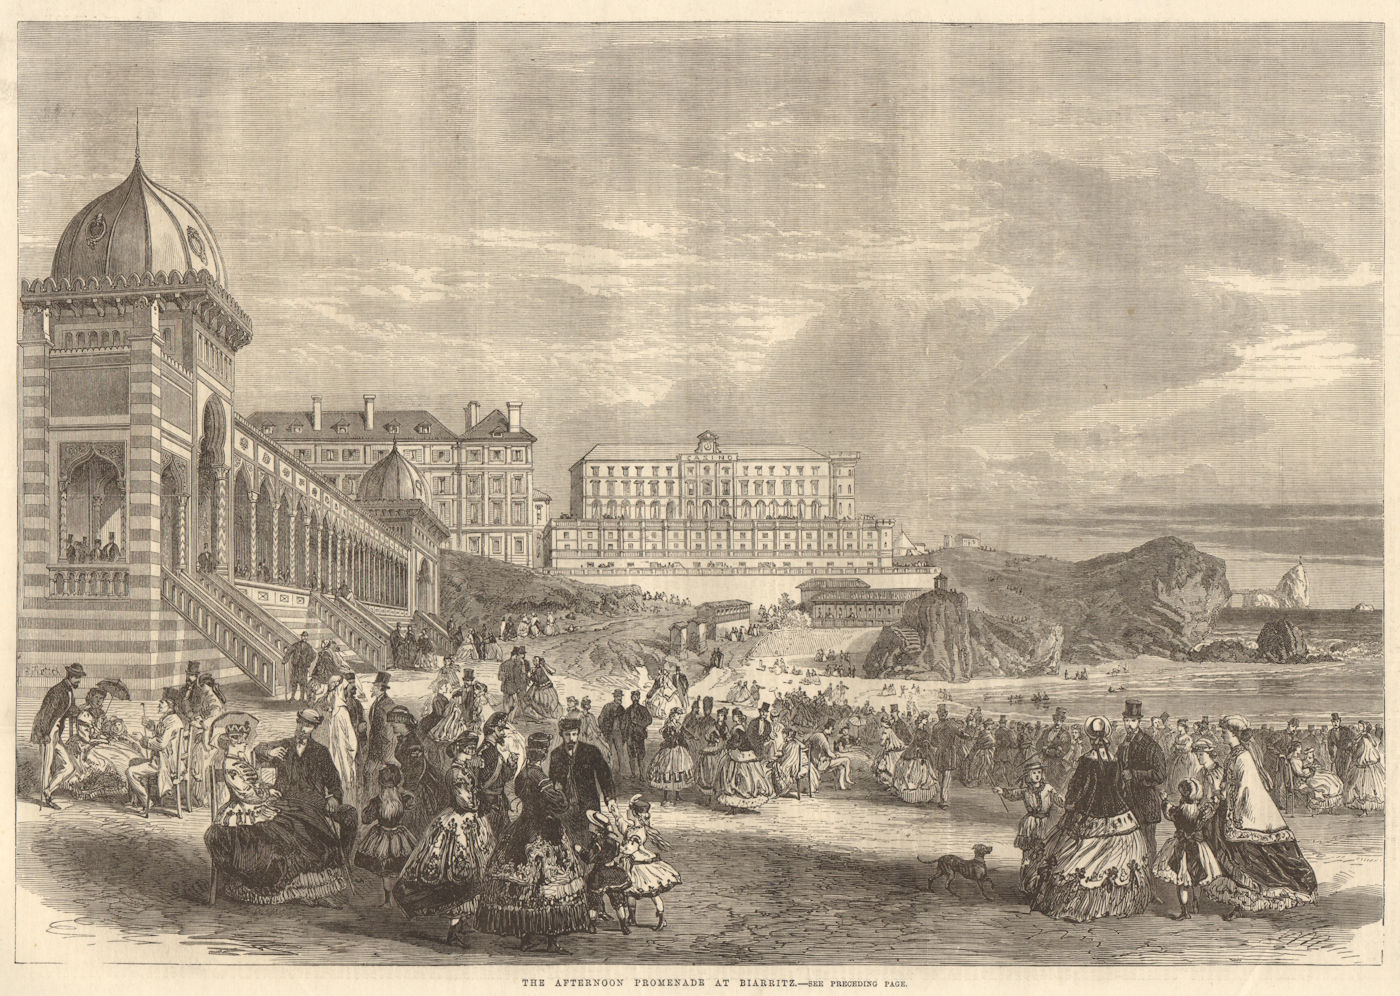 Associate Product The afternoon promenade at Biarritz. Pyrénées-Atlantiques 1866 ILN full page